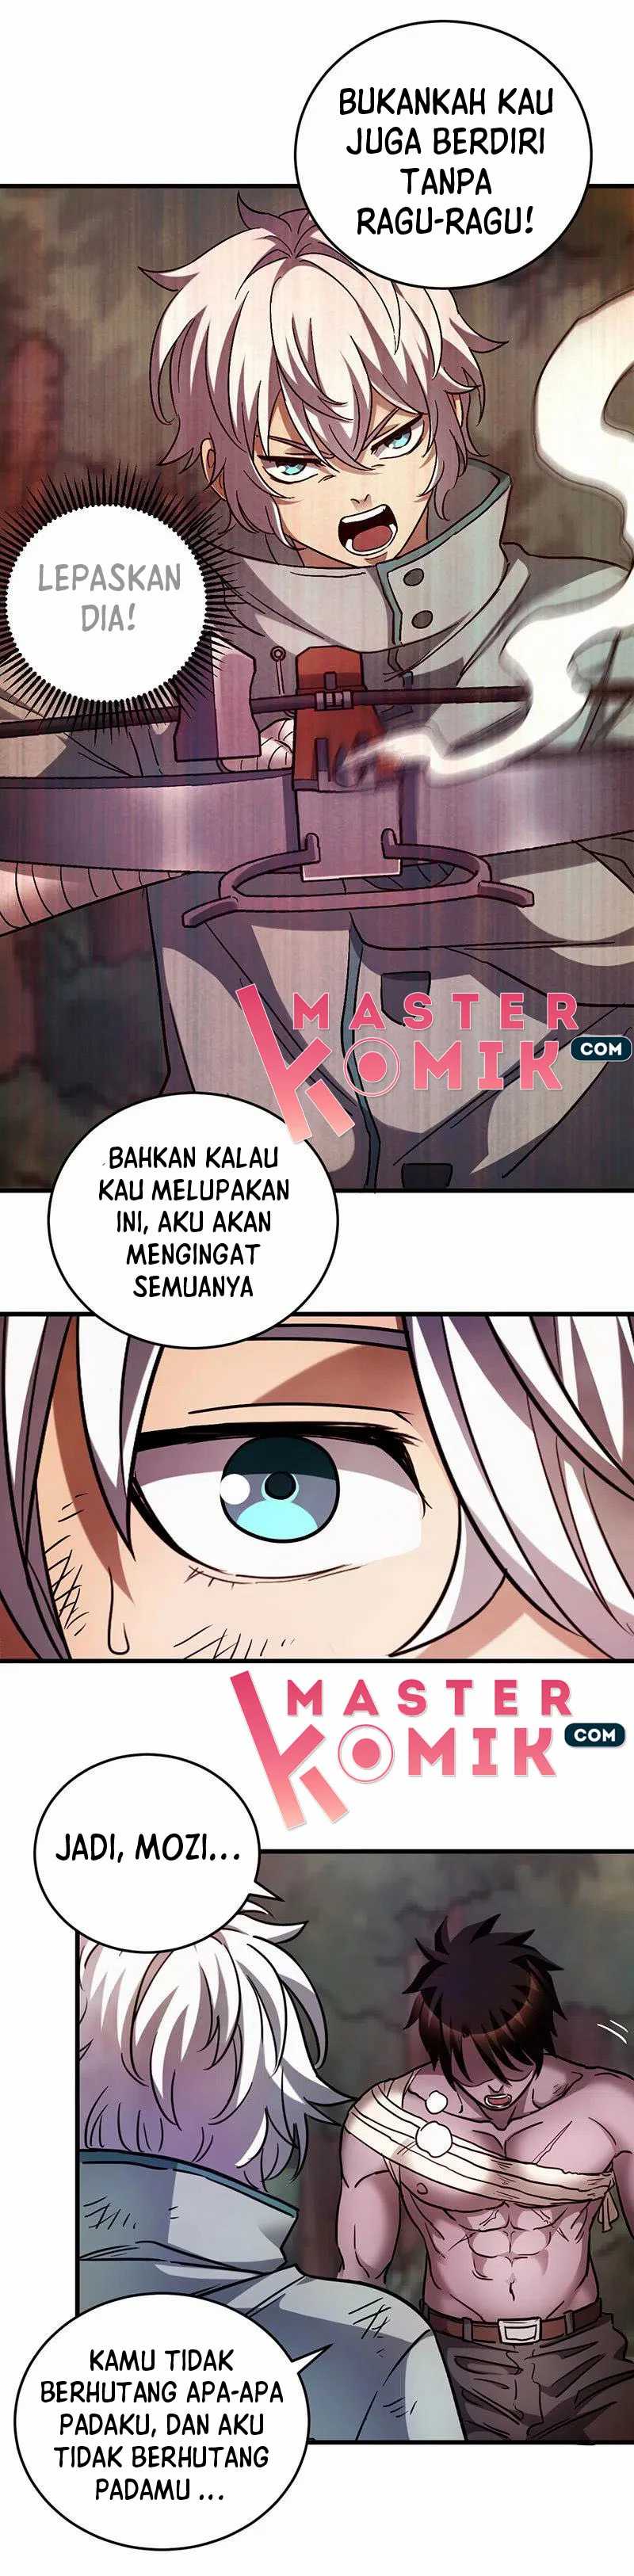 Strongest Evolution Of Zombie Chapter 44